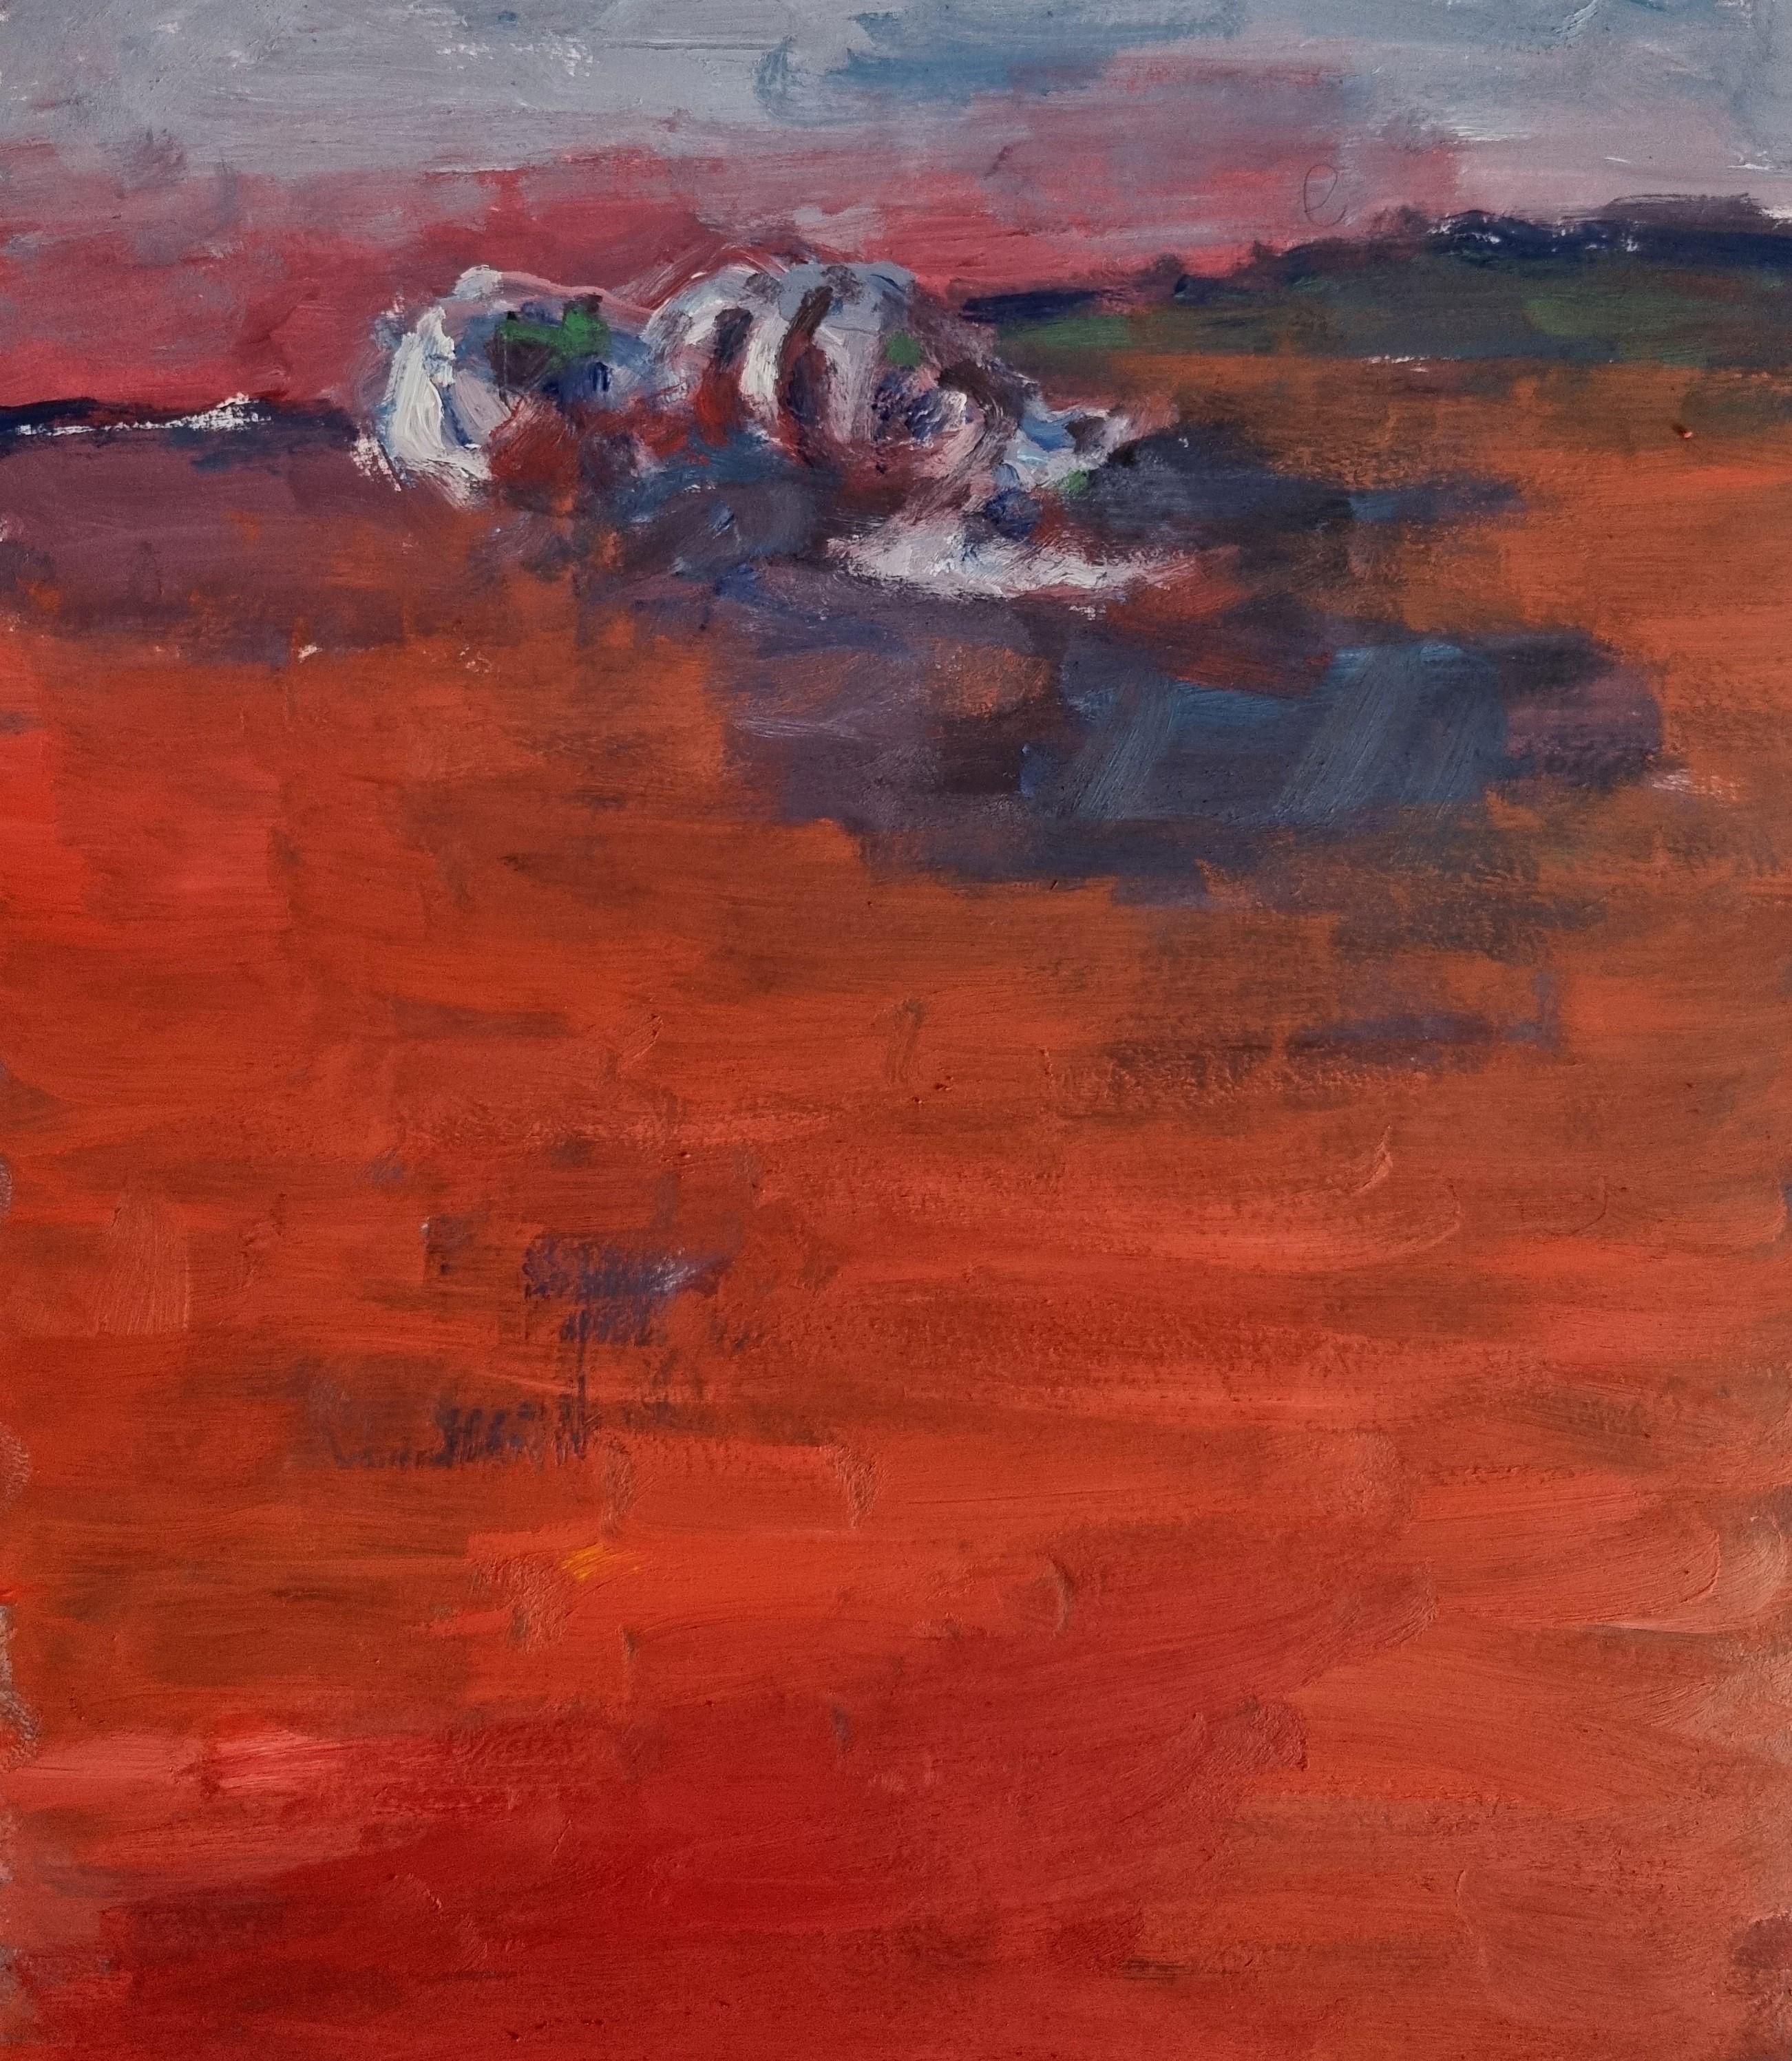 Remains (Body in the Field 1) - 21st Century, Work On Paper, Red, Contemporary - Abstract Expressionist Art by Zsolt Berszán